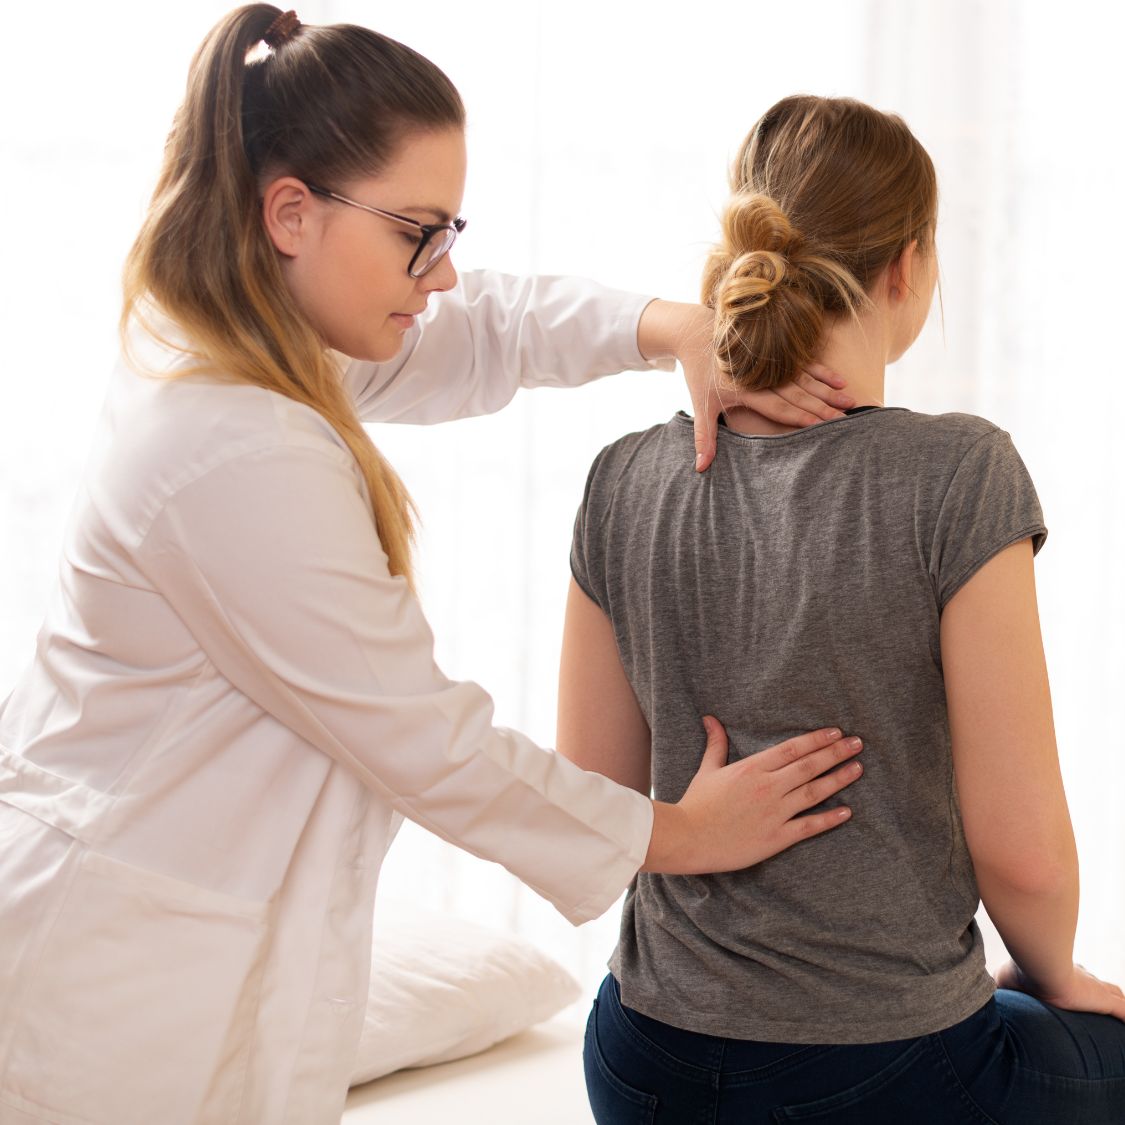 What You Should Know About a Chiropractic Career